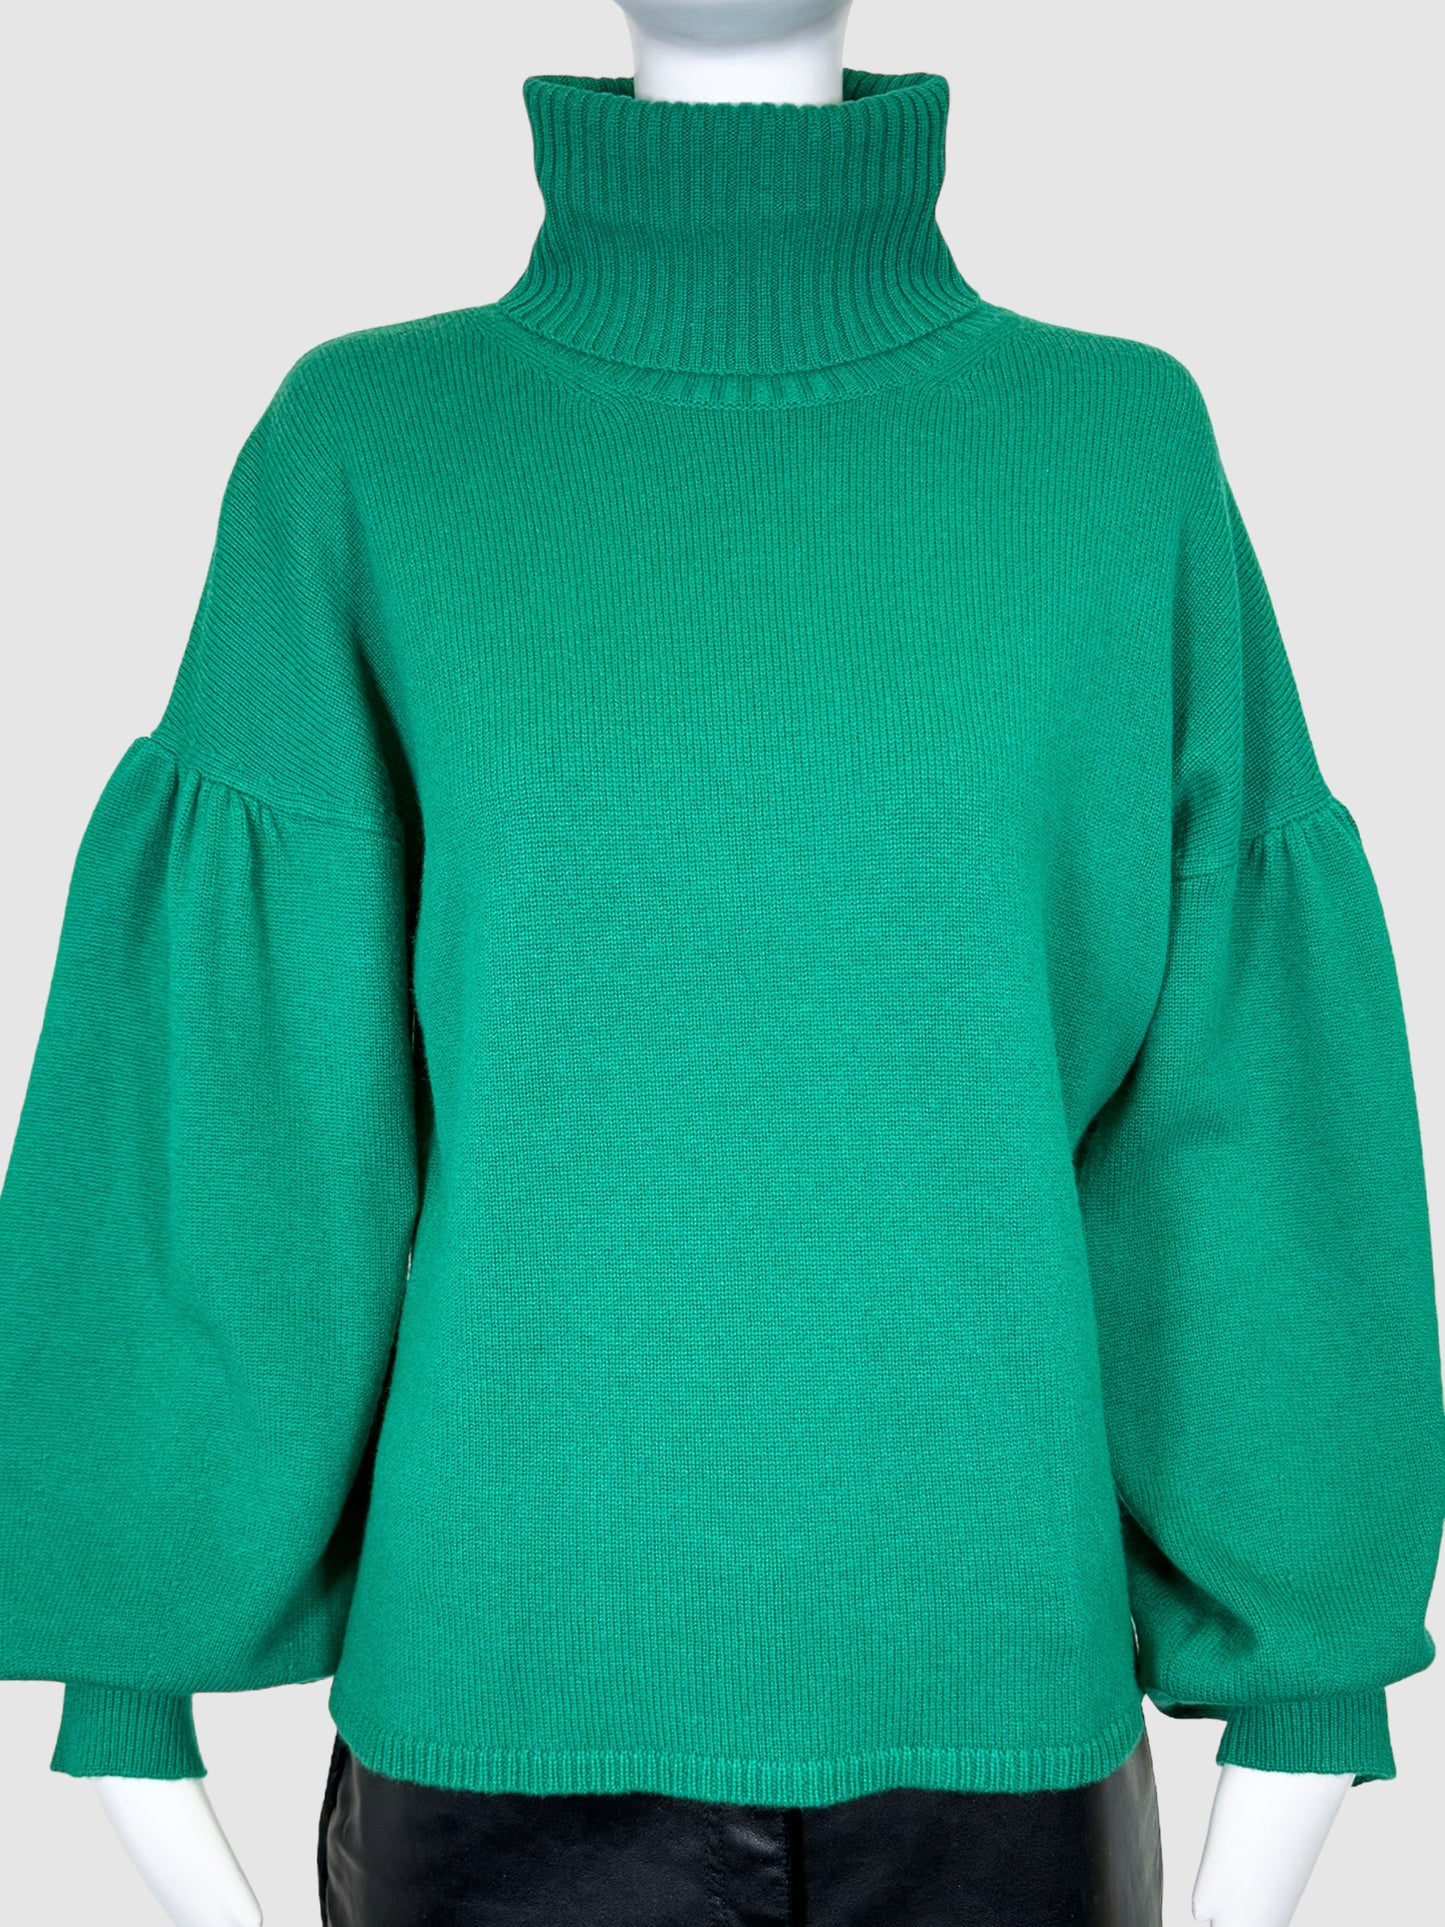 Max Mara Green Cashmere Wool Blend Turtleneck Sweater with Bell Sleeves